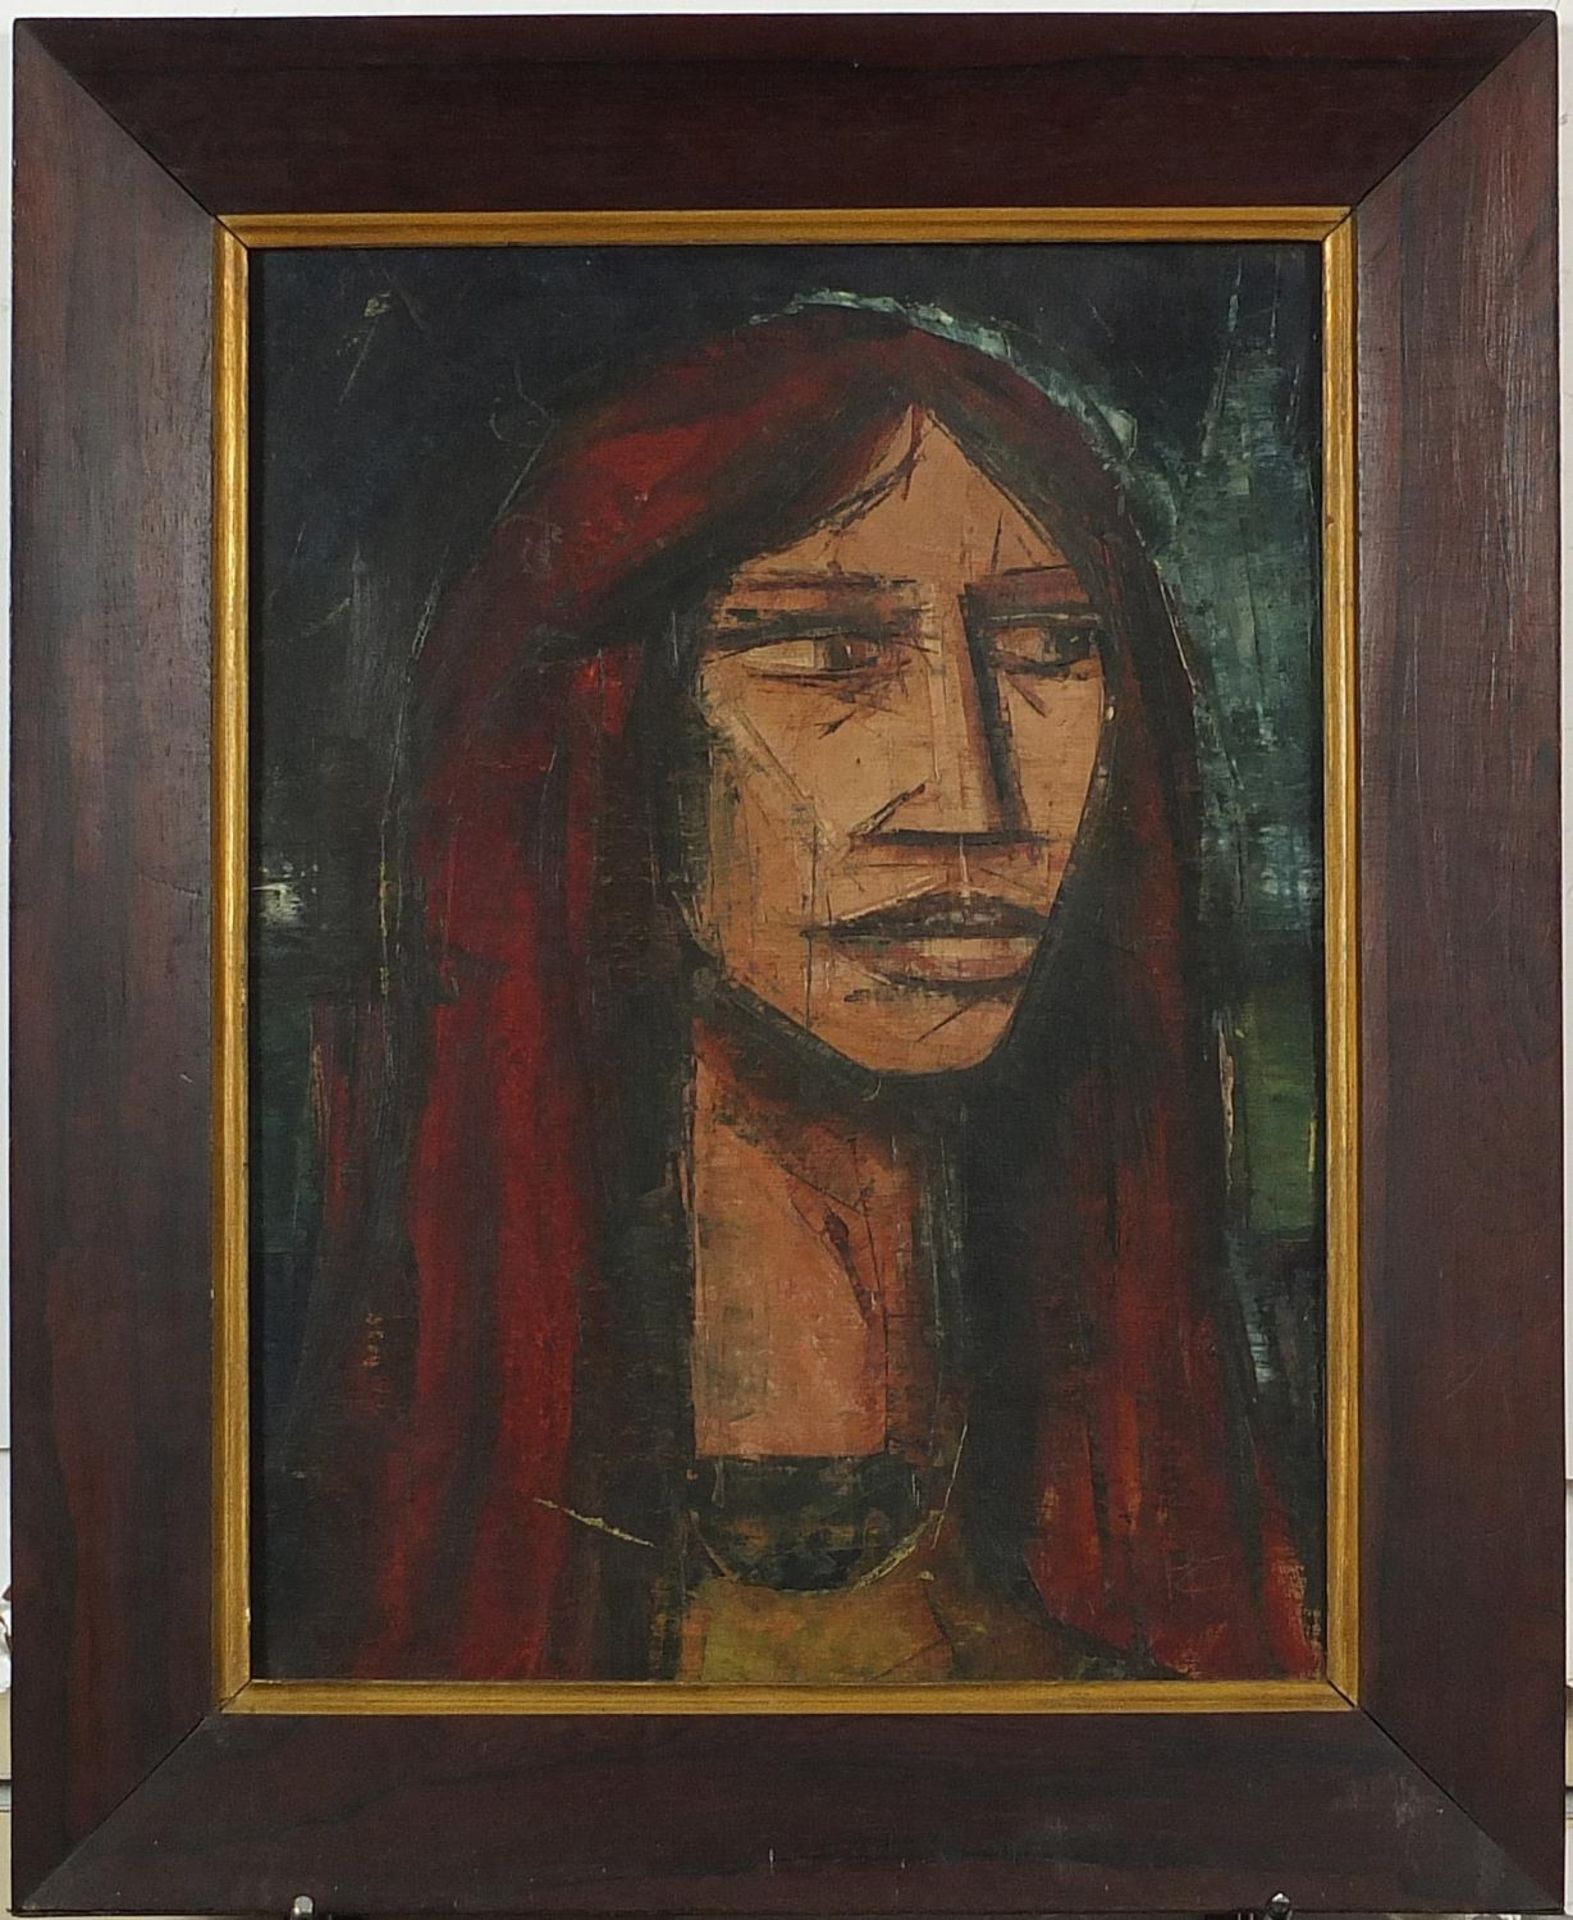 Head and shoulders portrait of a Native American, oil on panel, framed, 43cm x 32cm excluding the - Image 2 of 4